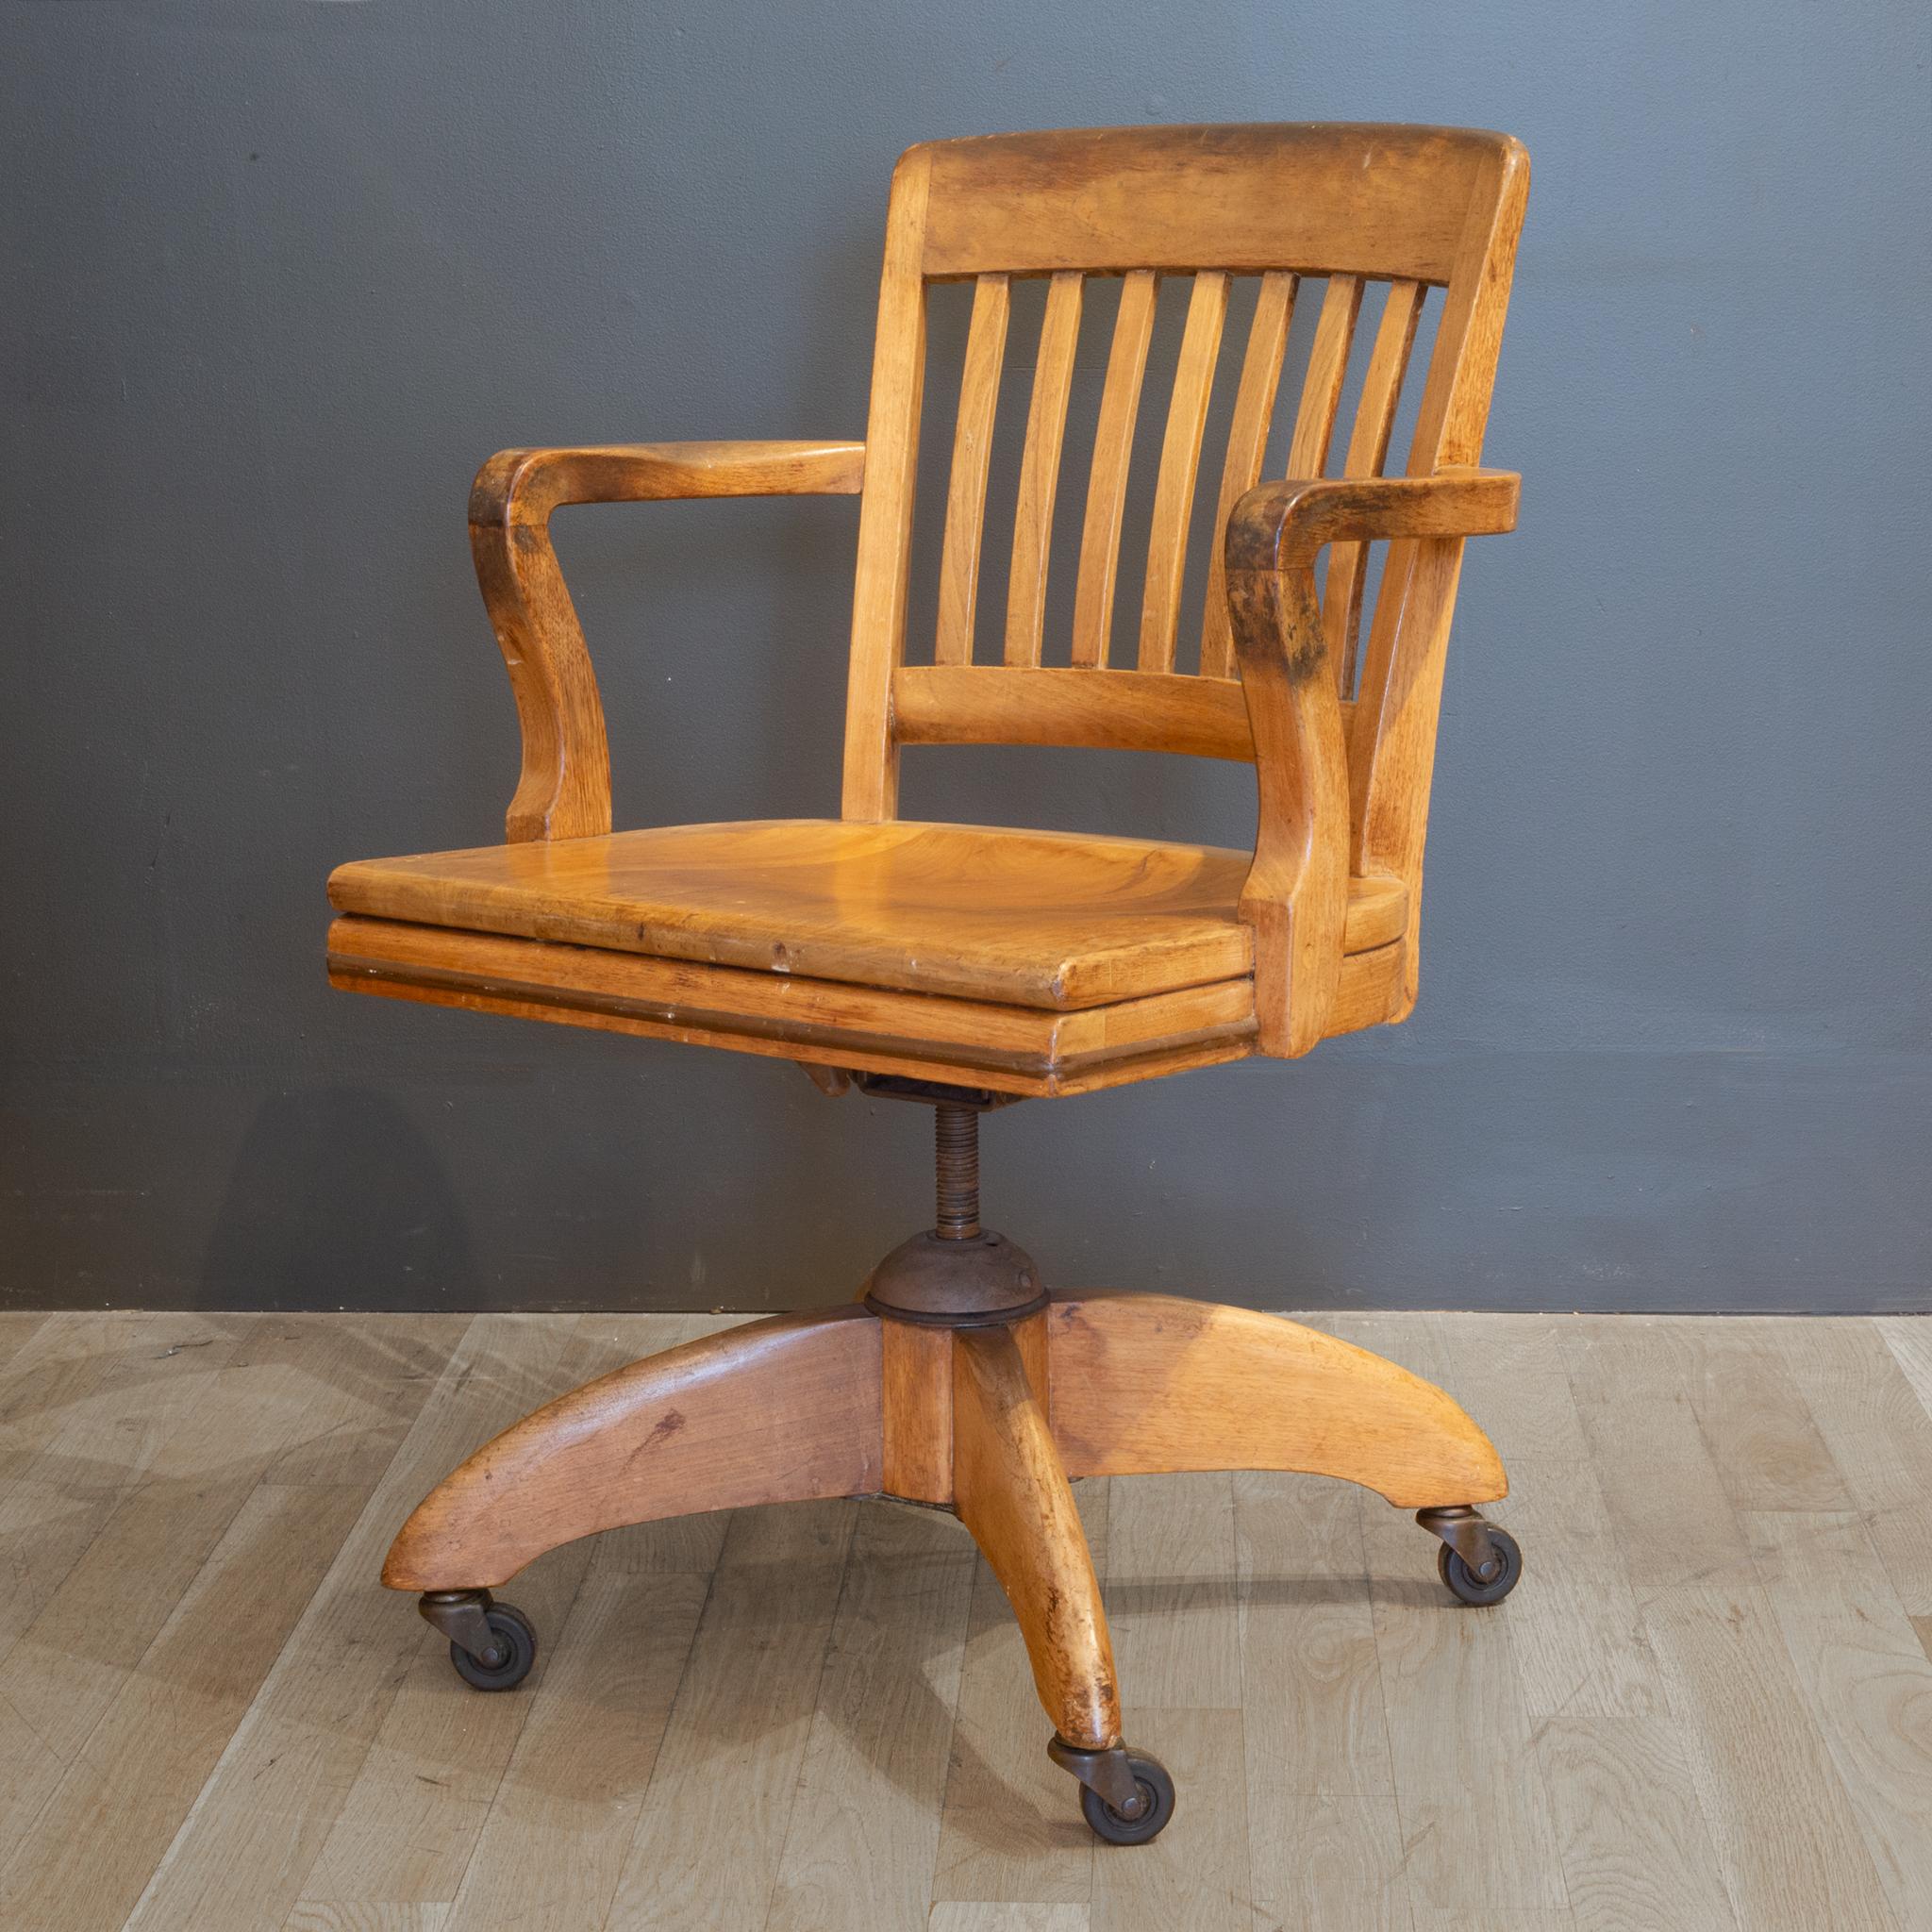 About

This is an original solid oak desk chair with cast iron mechanism and brass casters. This chair swivels, tilts back and the height is adjustable. This chair has retained its original finish and has minor structural damage.

Creator